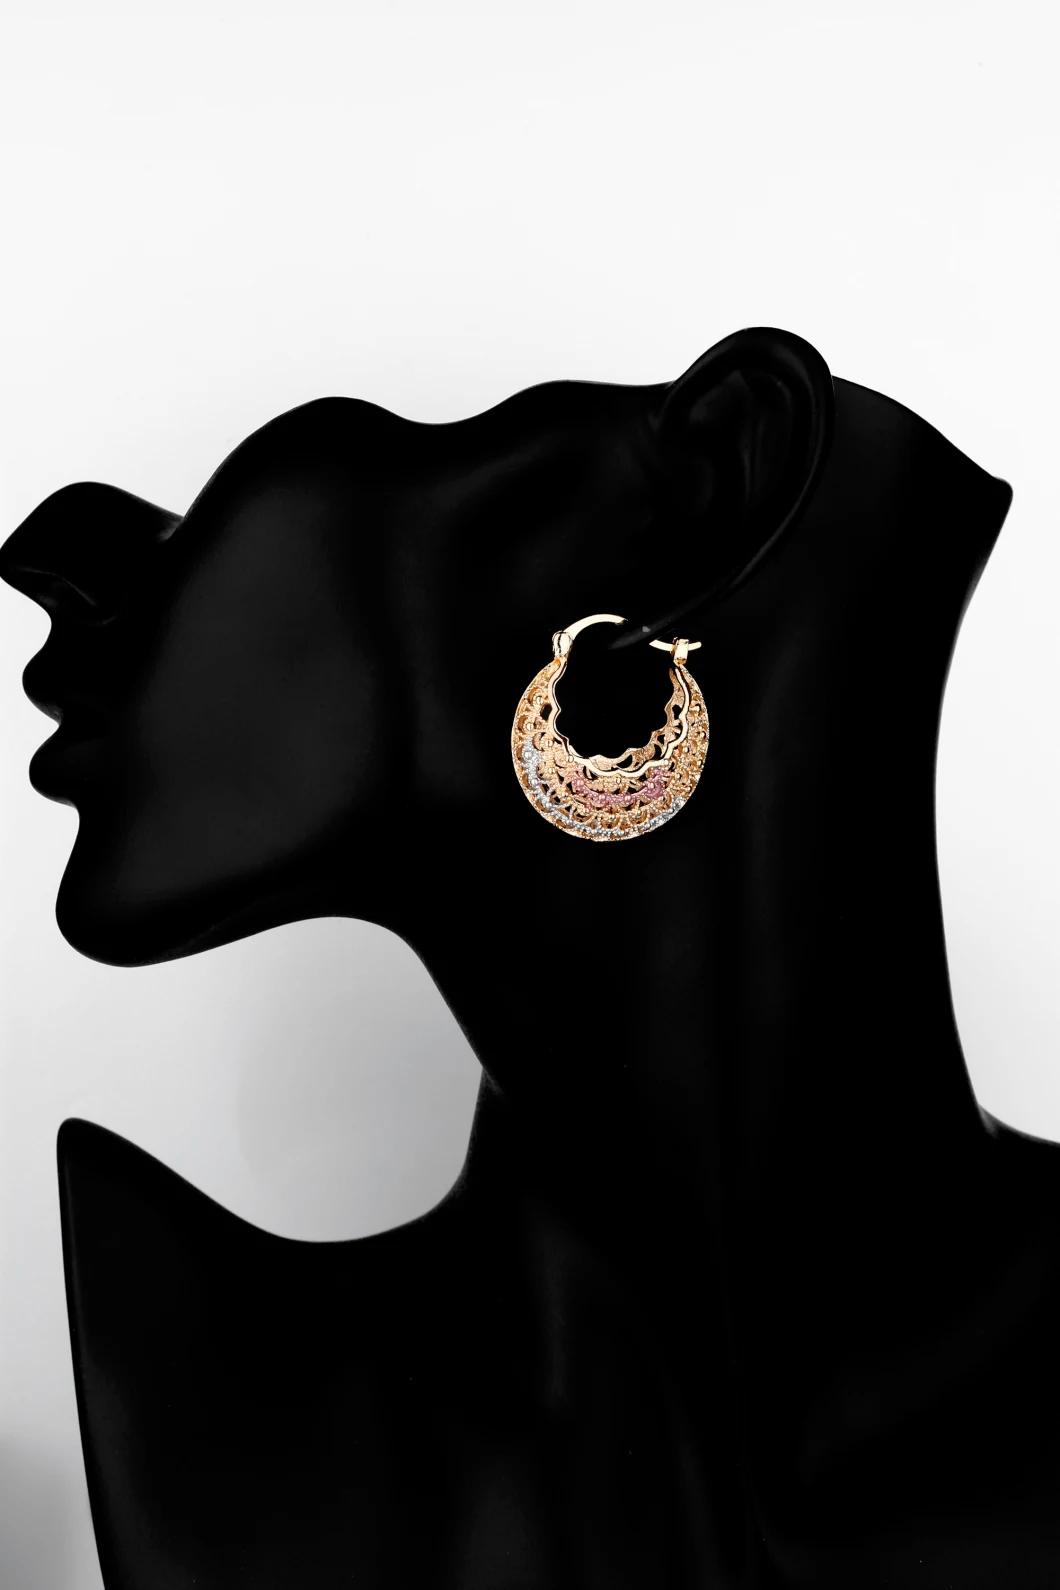 Earring Fashion Jewelry New Design Hoop Earring with Cubic Zirconia